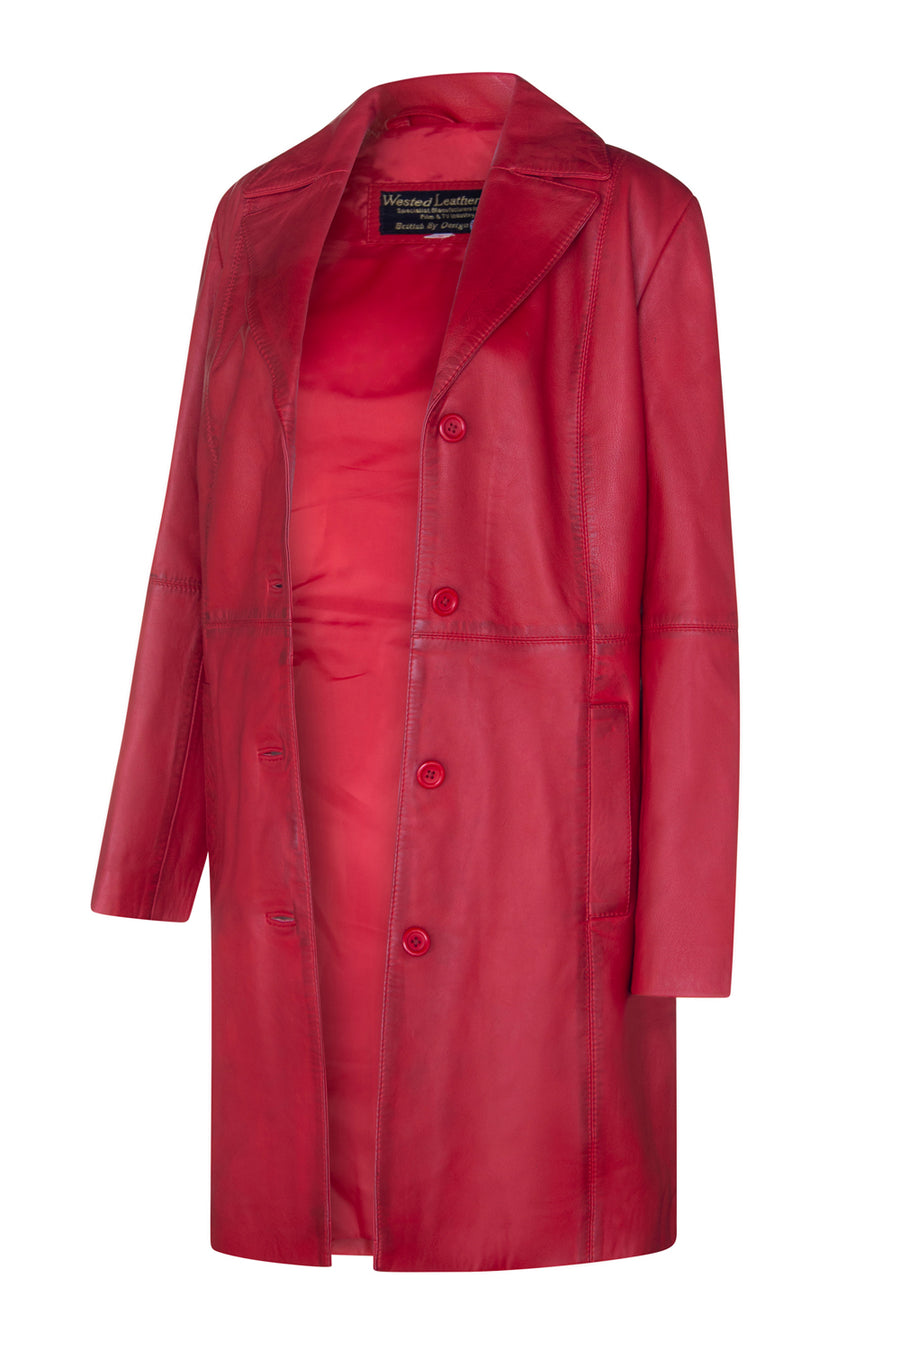 LADIES Red ¾ LEATHER COAT CLASSIC 3/4 KNEE-LENGTH – Wested Leather Co